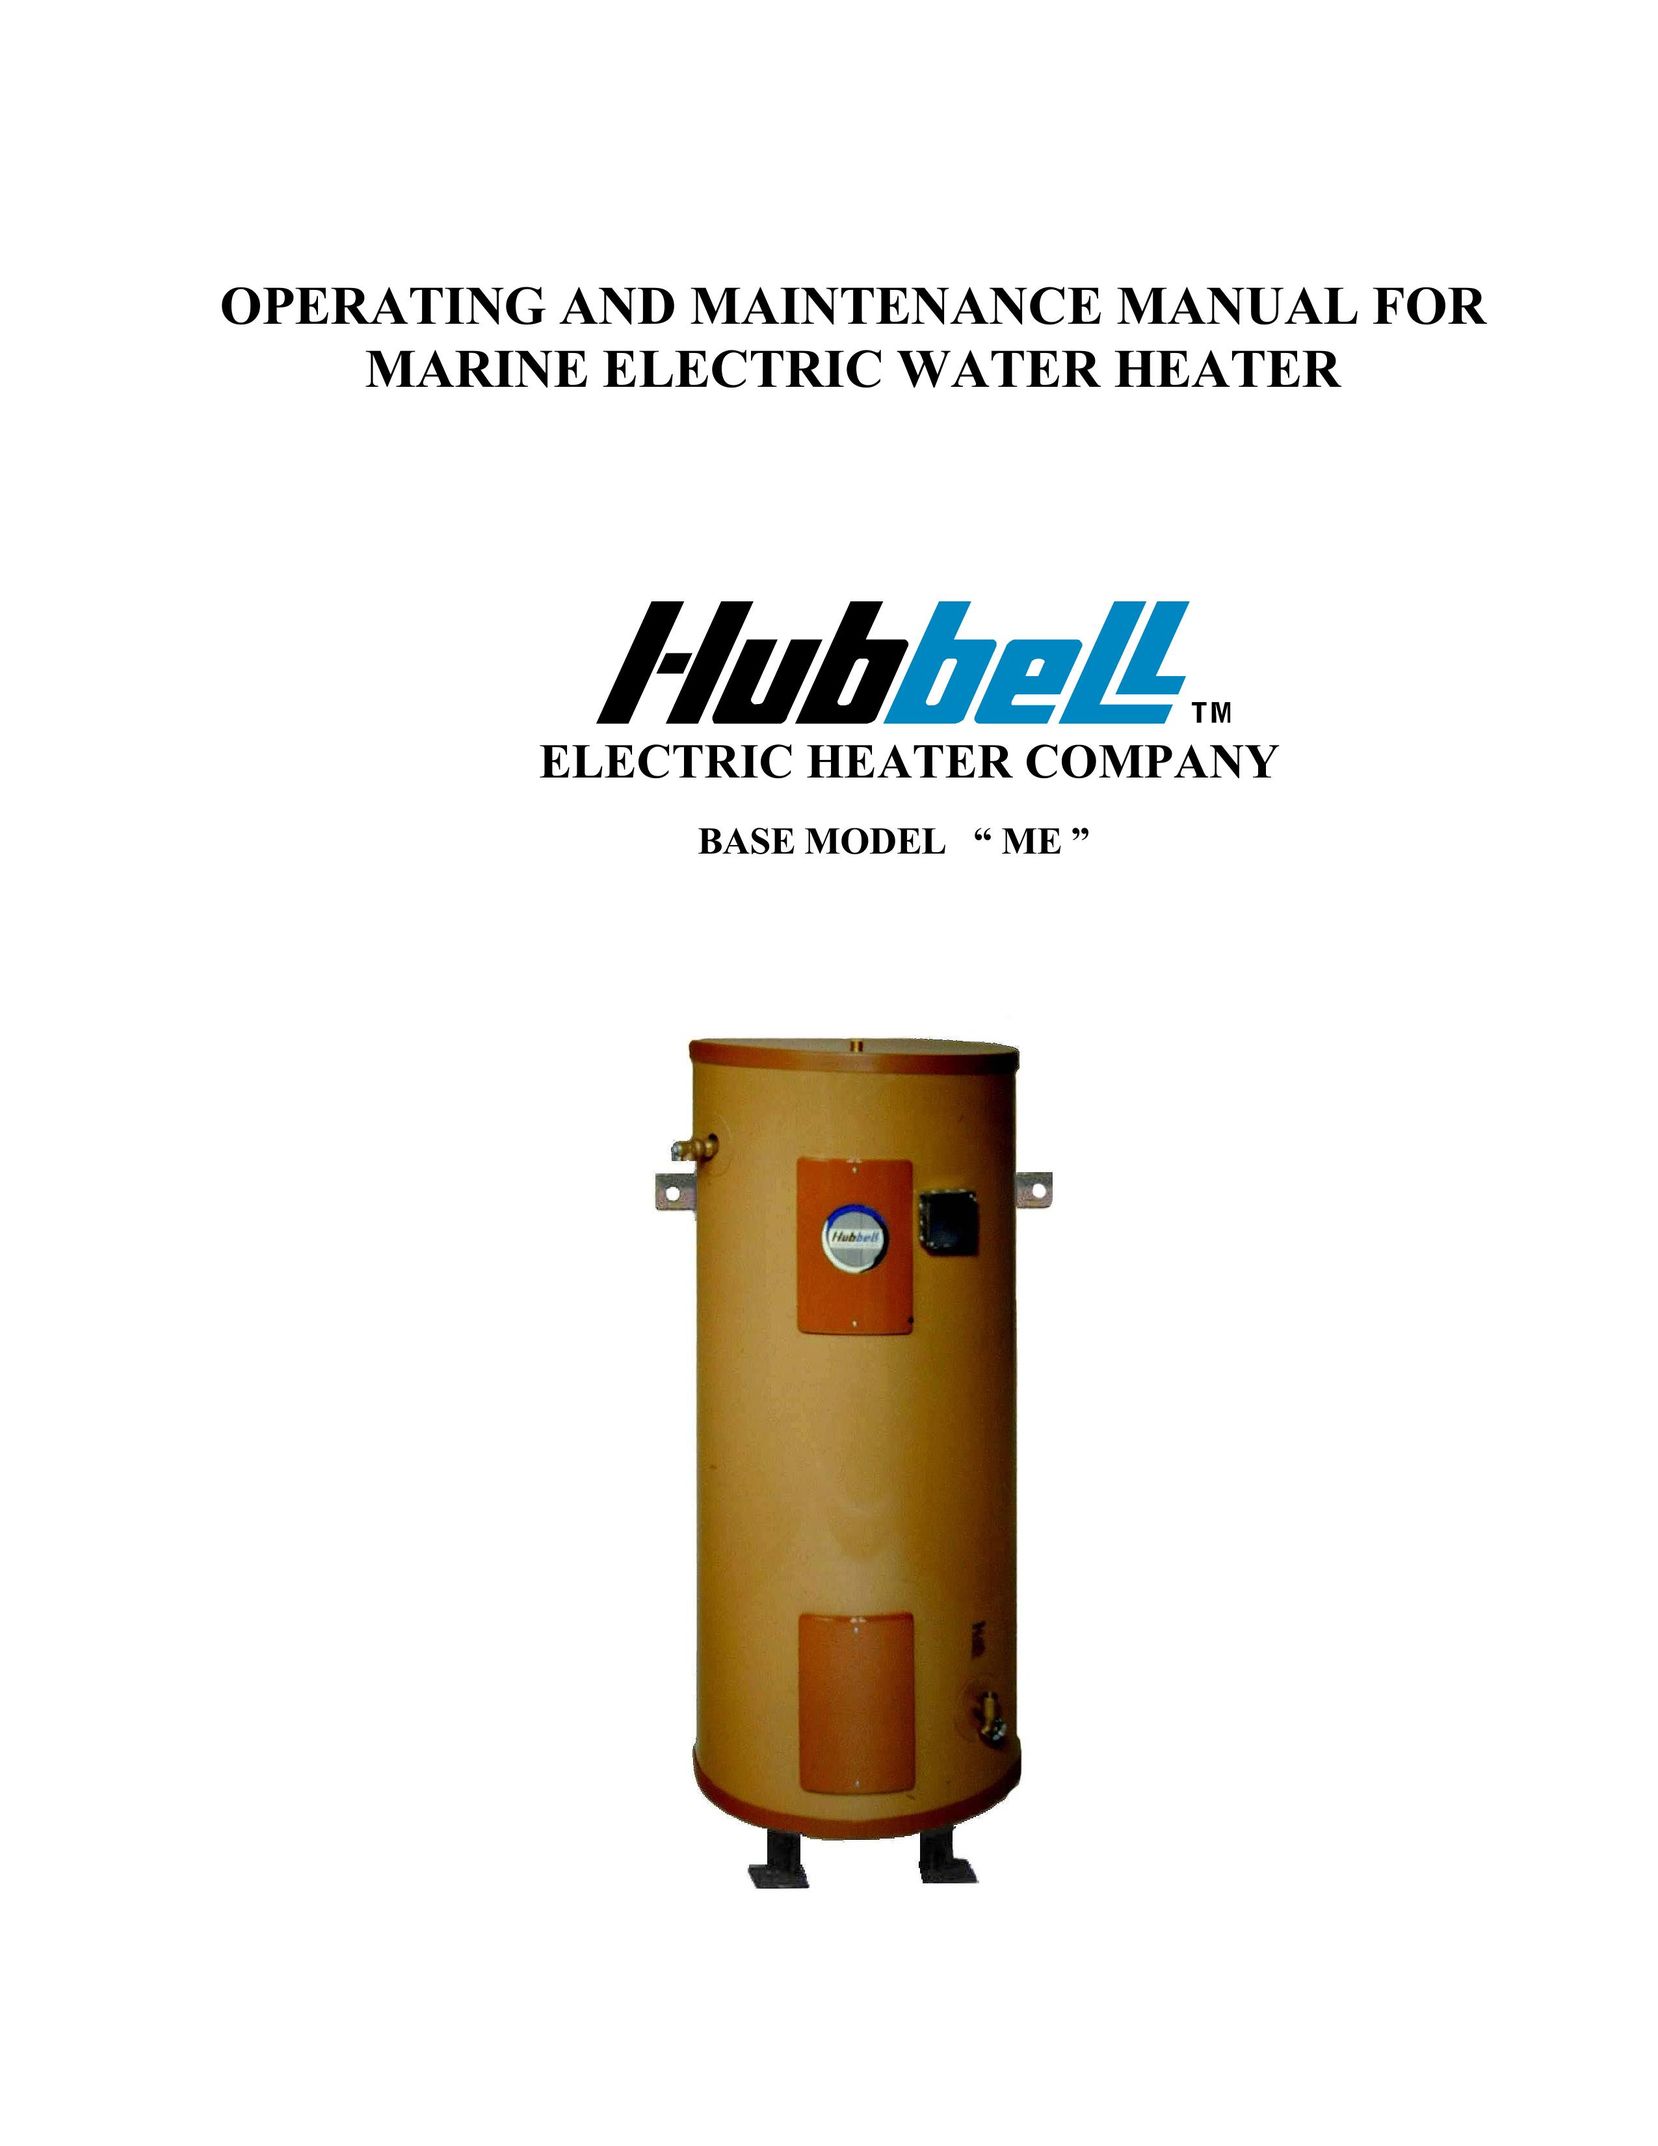 Hubbell Electric Heater Company ME Water Heater User Manual